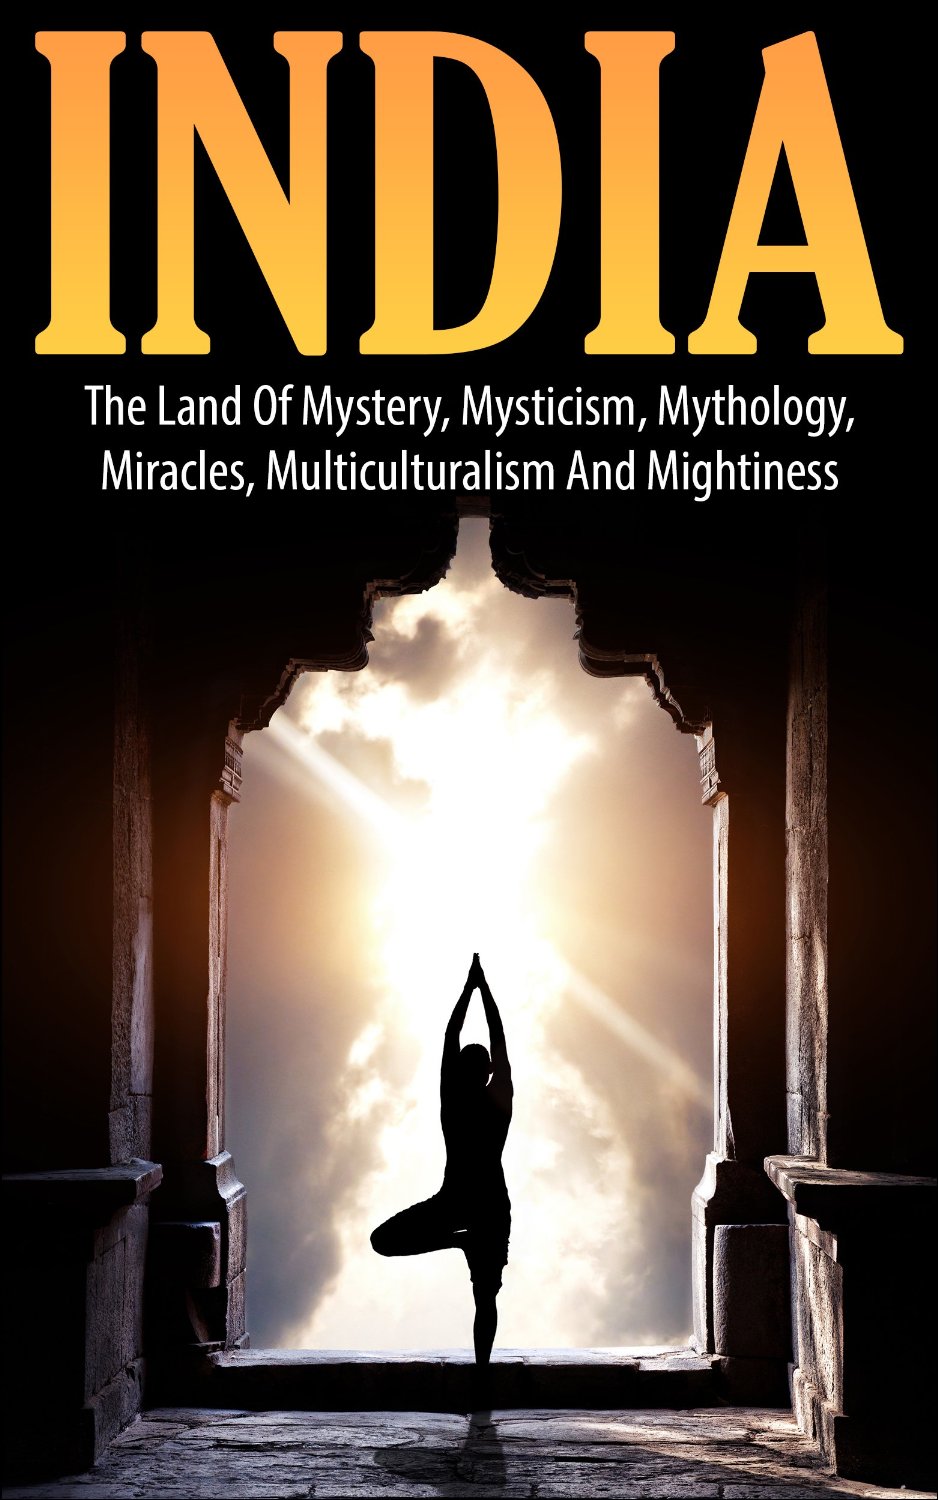 India: The Land of Mystery, Mysticism, Mythology, Miracles, Multiculturalism, and Mightiness by John K.